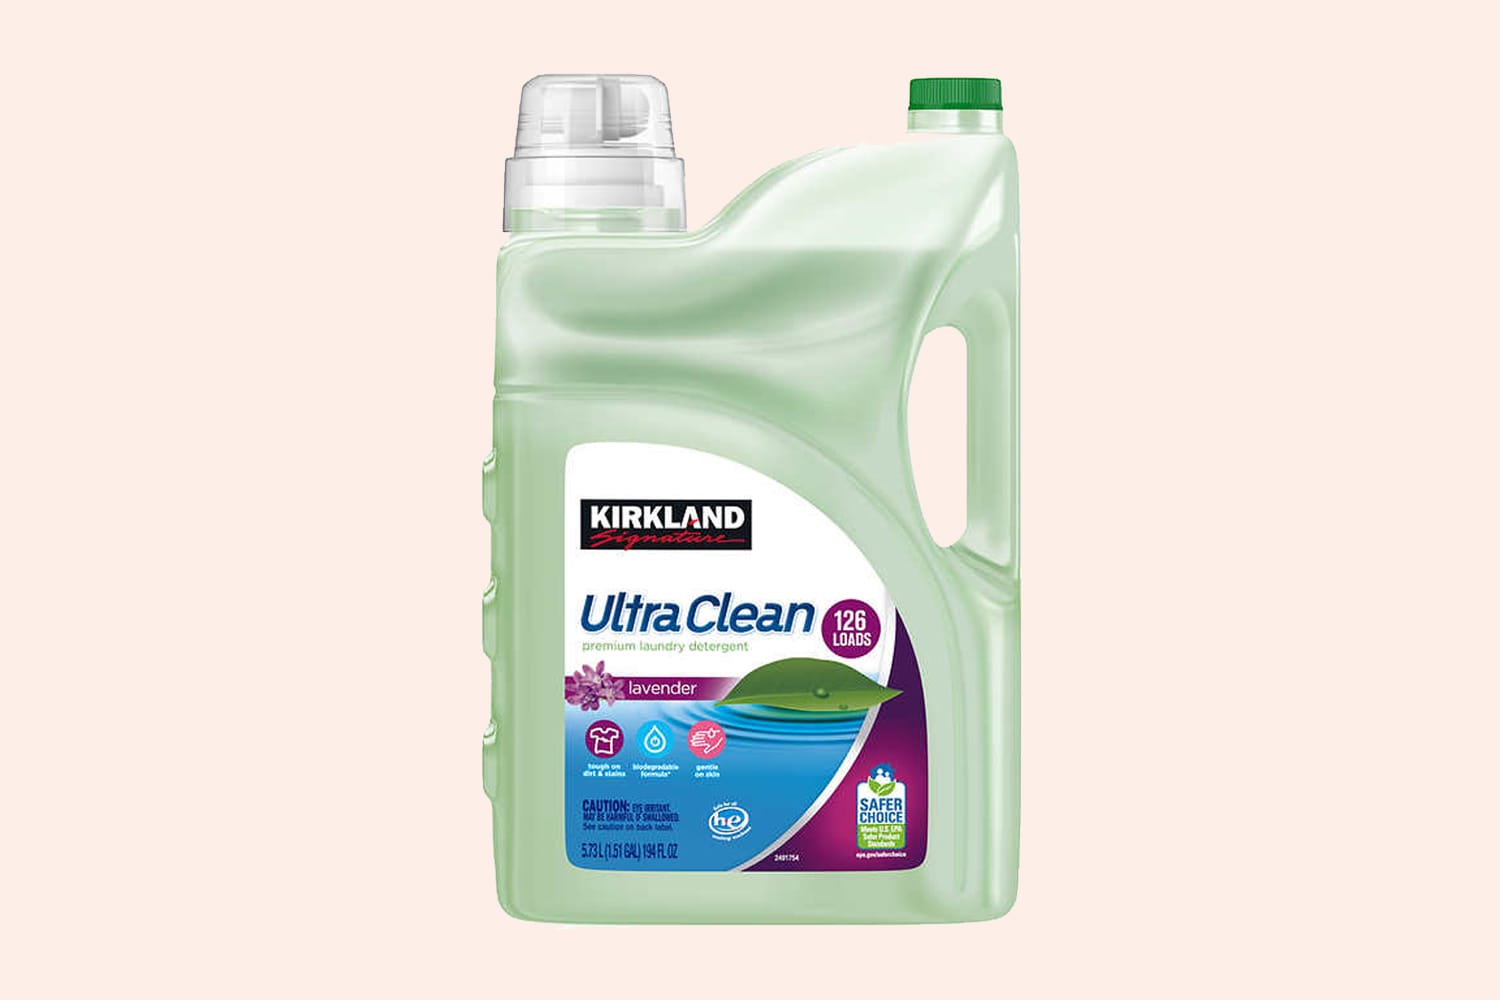 https://cdn.apartmenttherapy.info/image/upload/v1564754871/at/living/costco-cleaning-laundry-detergent-lavender.jpg